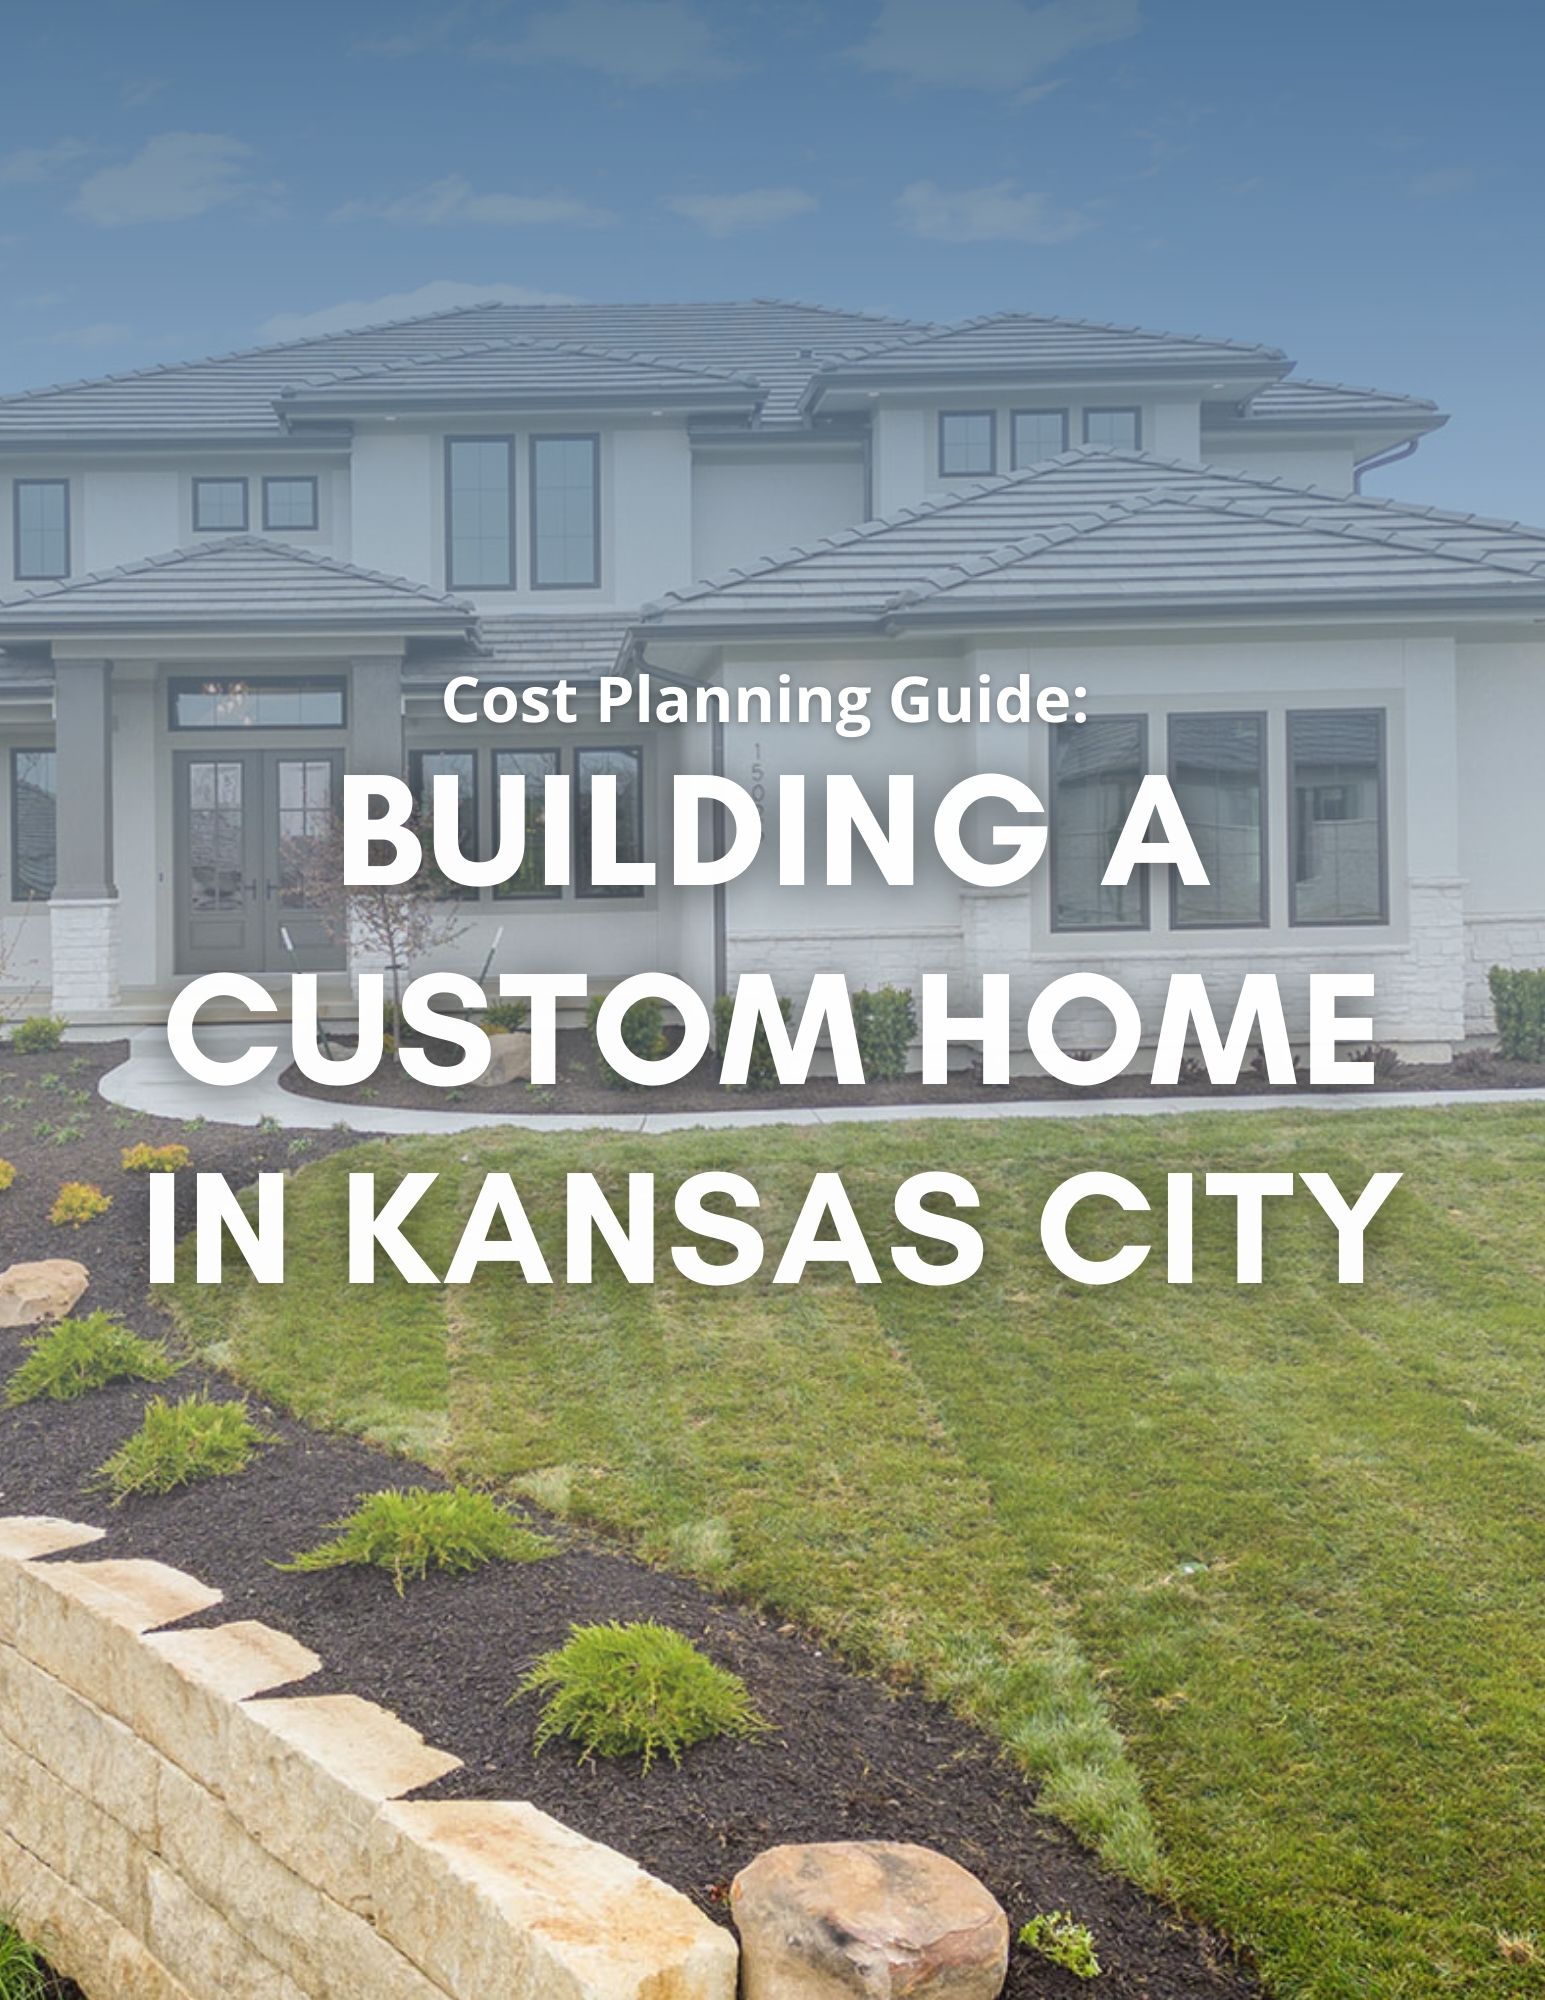 Cost Planning Guide Building a Custom Home Kansas City